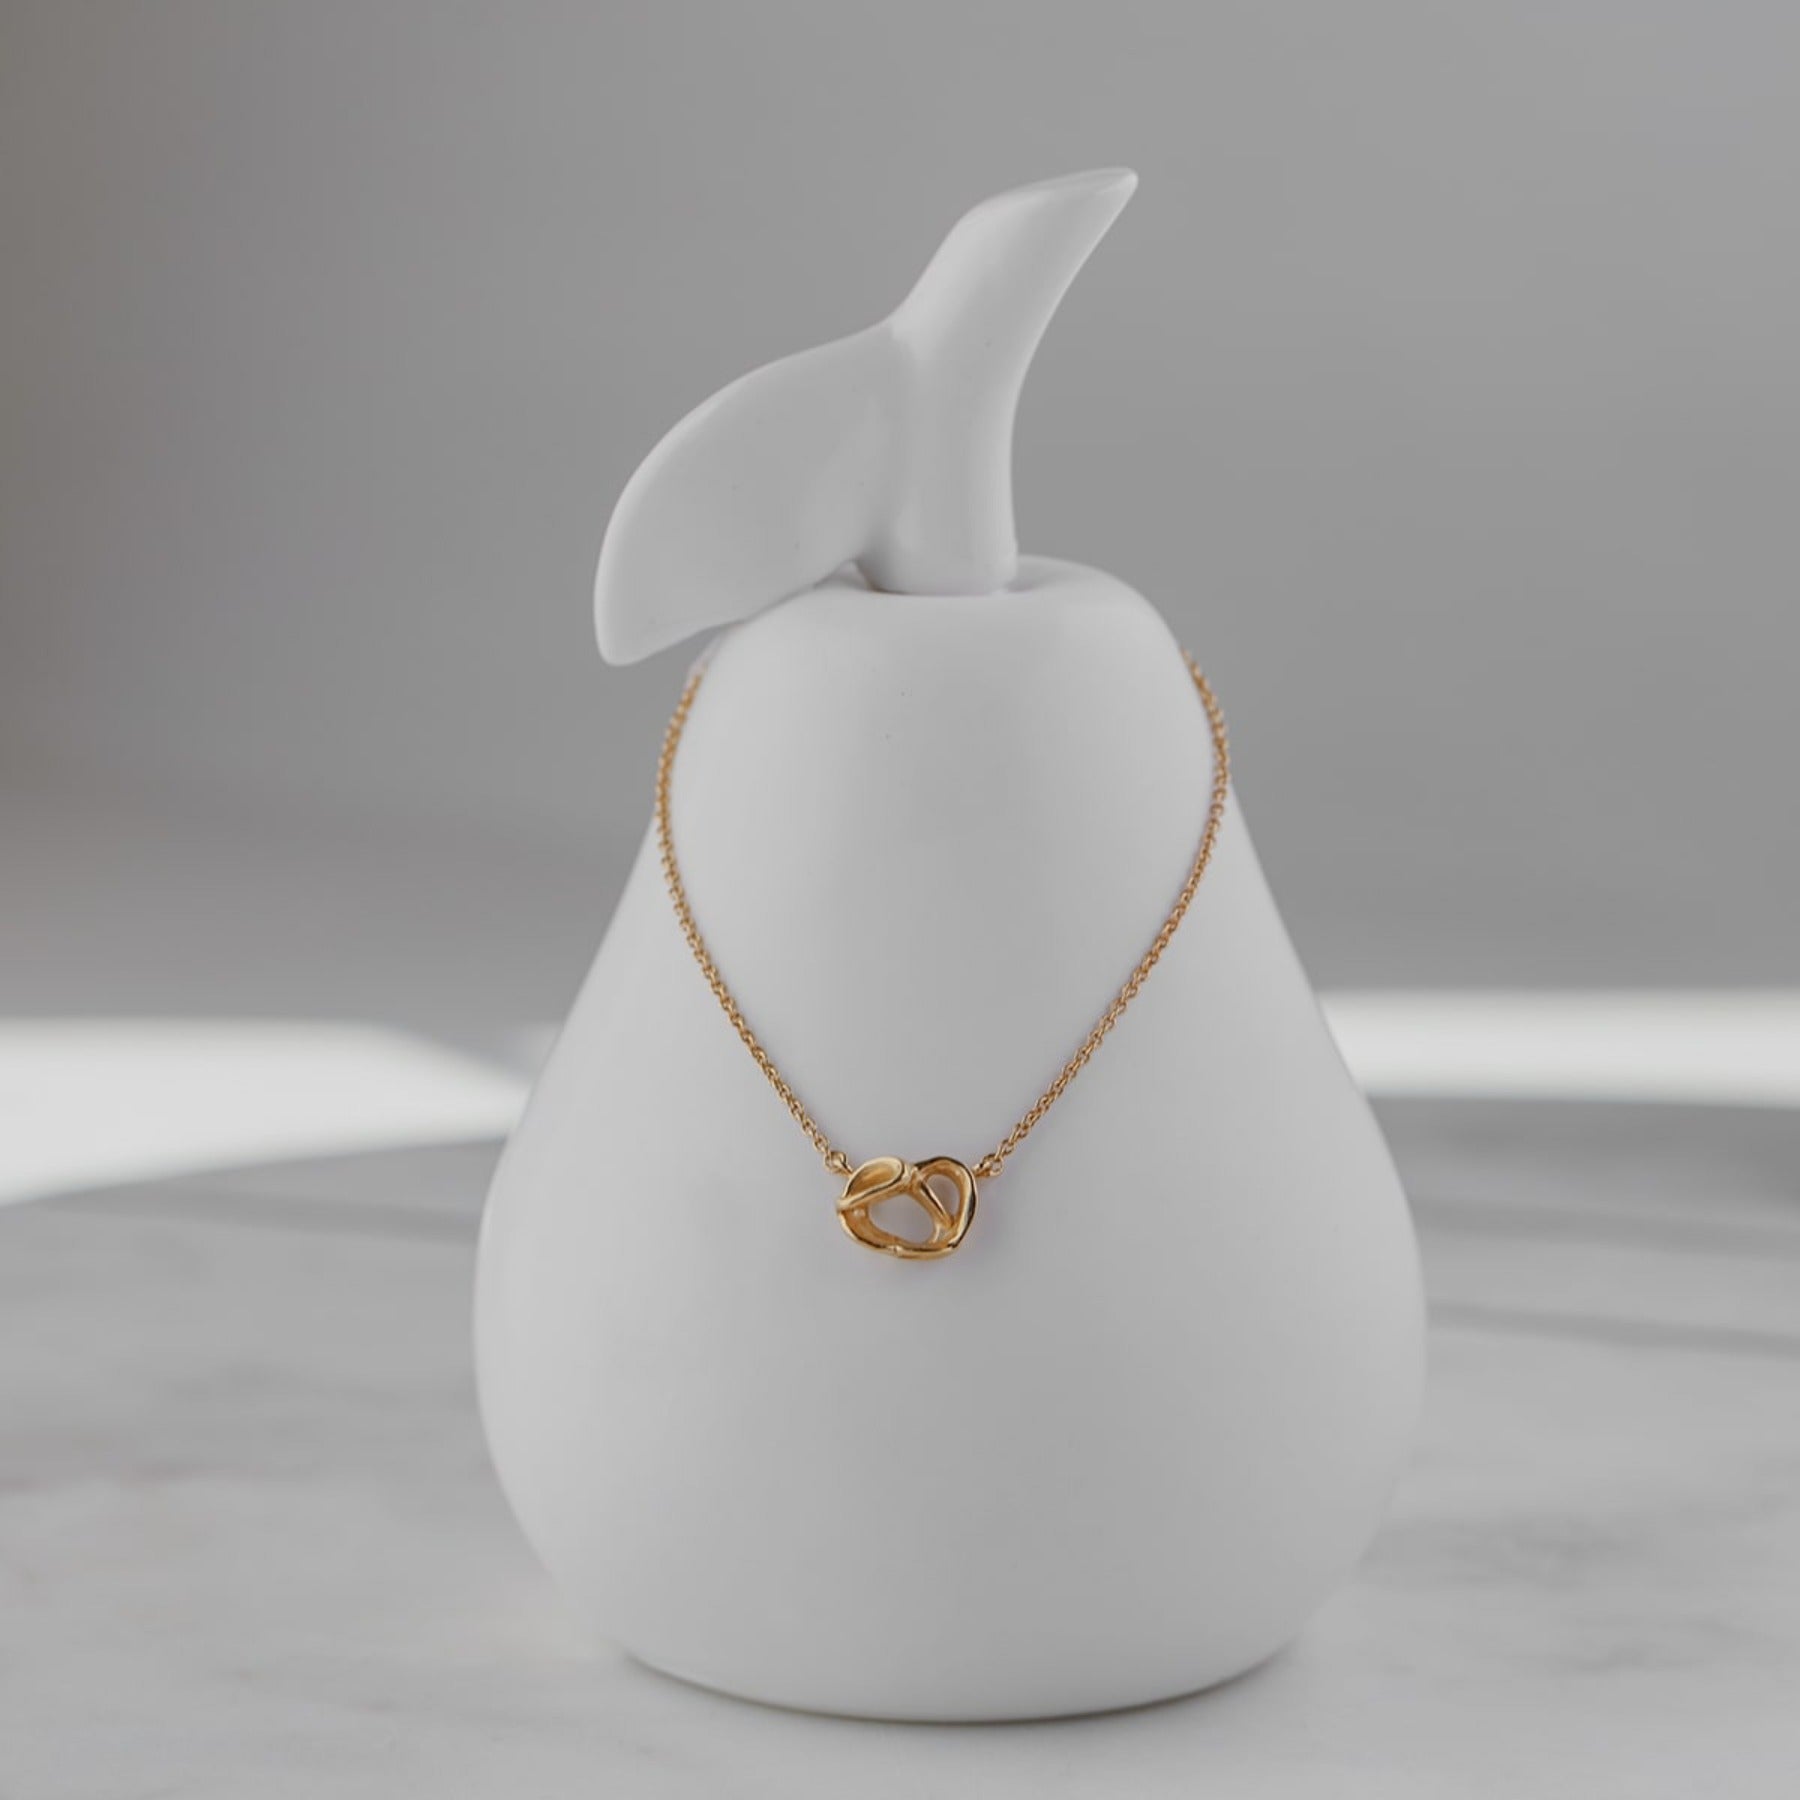 Abstract pretzel pendant necklace on a delicate cable chain finished with an Anjou pear charm in 18k gold vermeil.